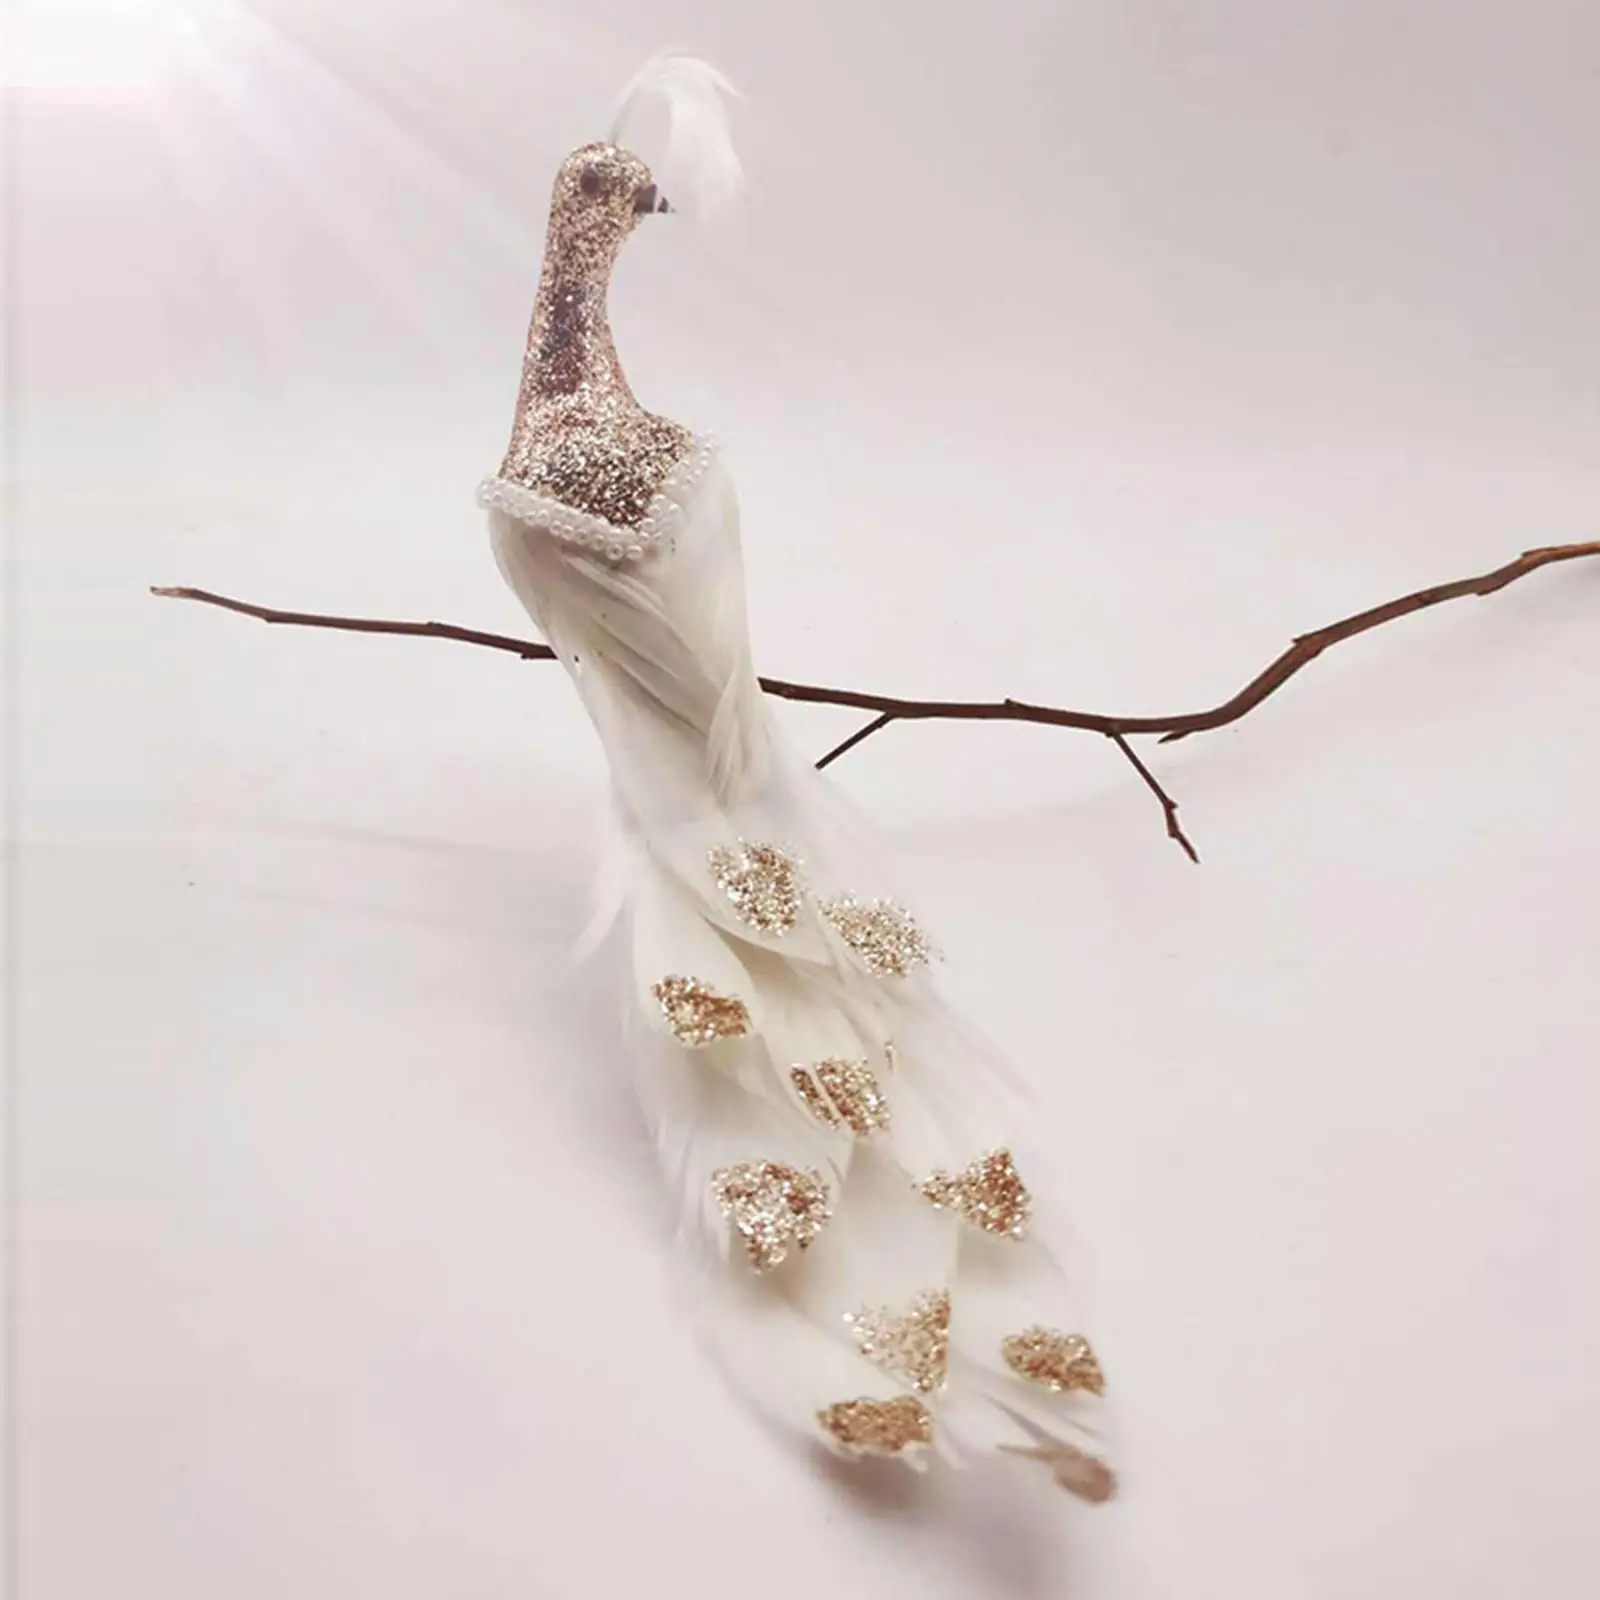 Artificial Peacock Figurines Decorative Animal Miniature Photo Props Fake Feathered Birds for Garden Home Wedding Yard